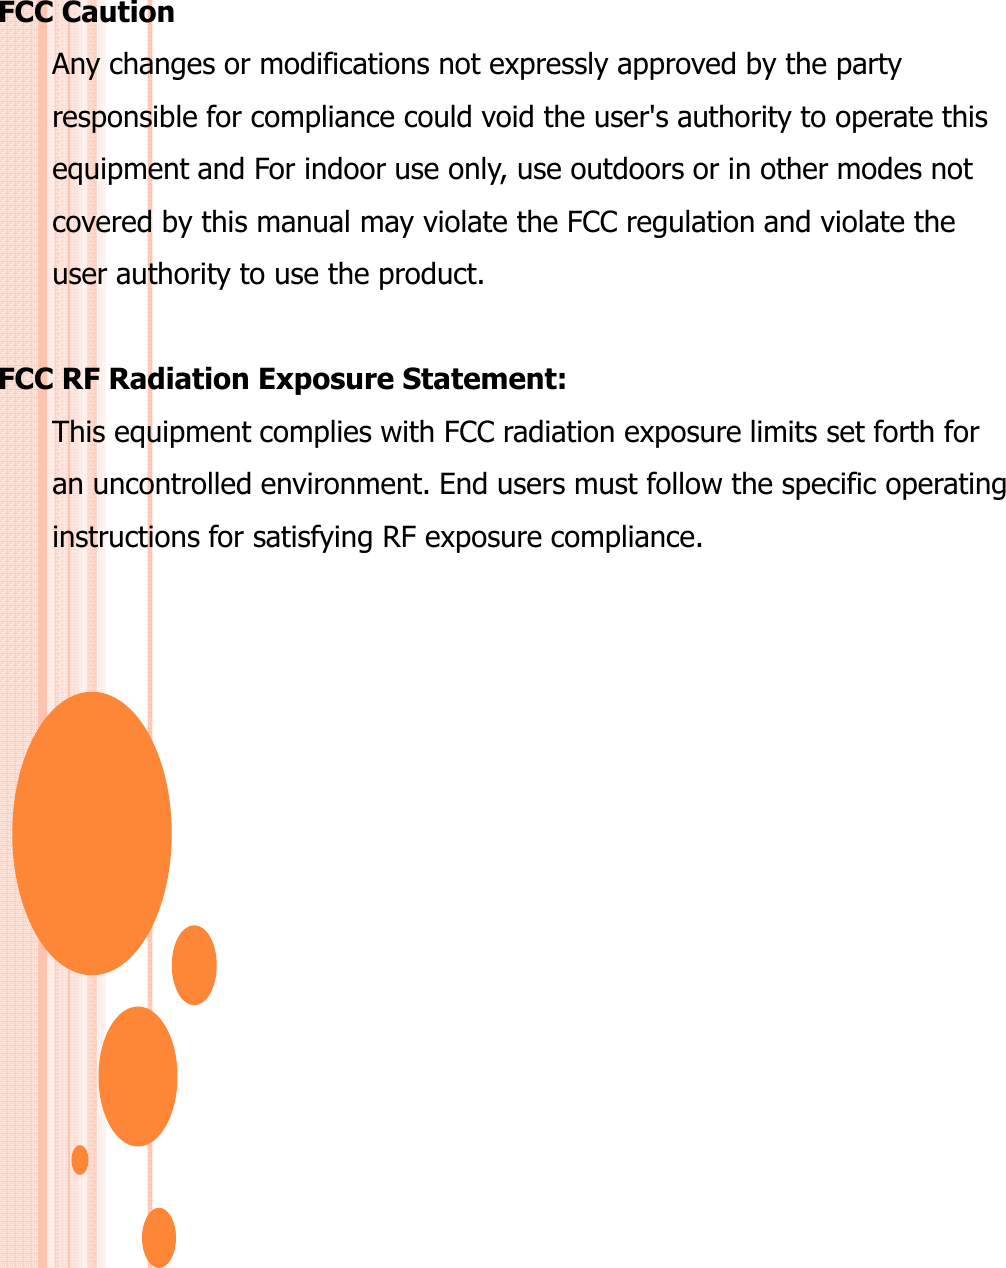 FCC CautionAny changes or modifications not expressly approved by the party responsible for compliance could void the user&apos;s authority to operate thisequipment and For indoor use only, use outdoors or in other modes notcovered by this manual may violate the FCC regulation and violate theuser authority to use the product.FCC RF Radiation Exposure Statement:This equipment complies with FCC radiation exposure limits set forth foran uncontrolled environment. End users must follow the specific operatinginstructions for satisfying RF exposure compliance. 